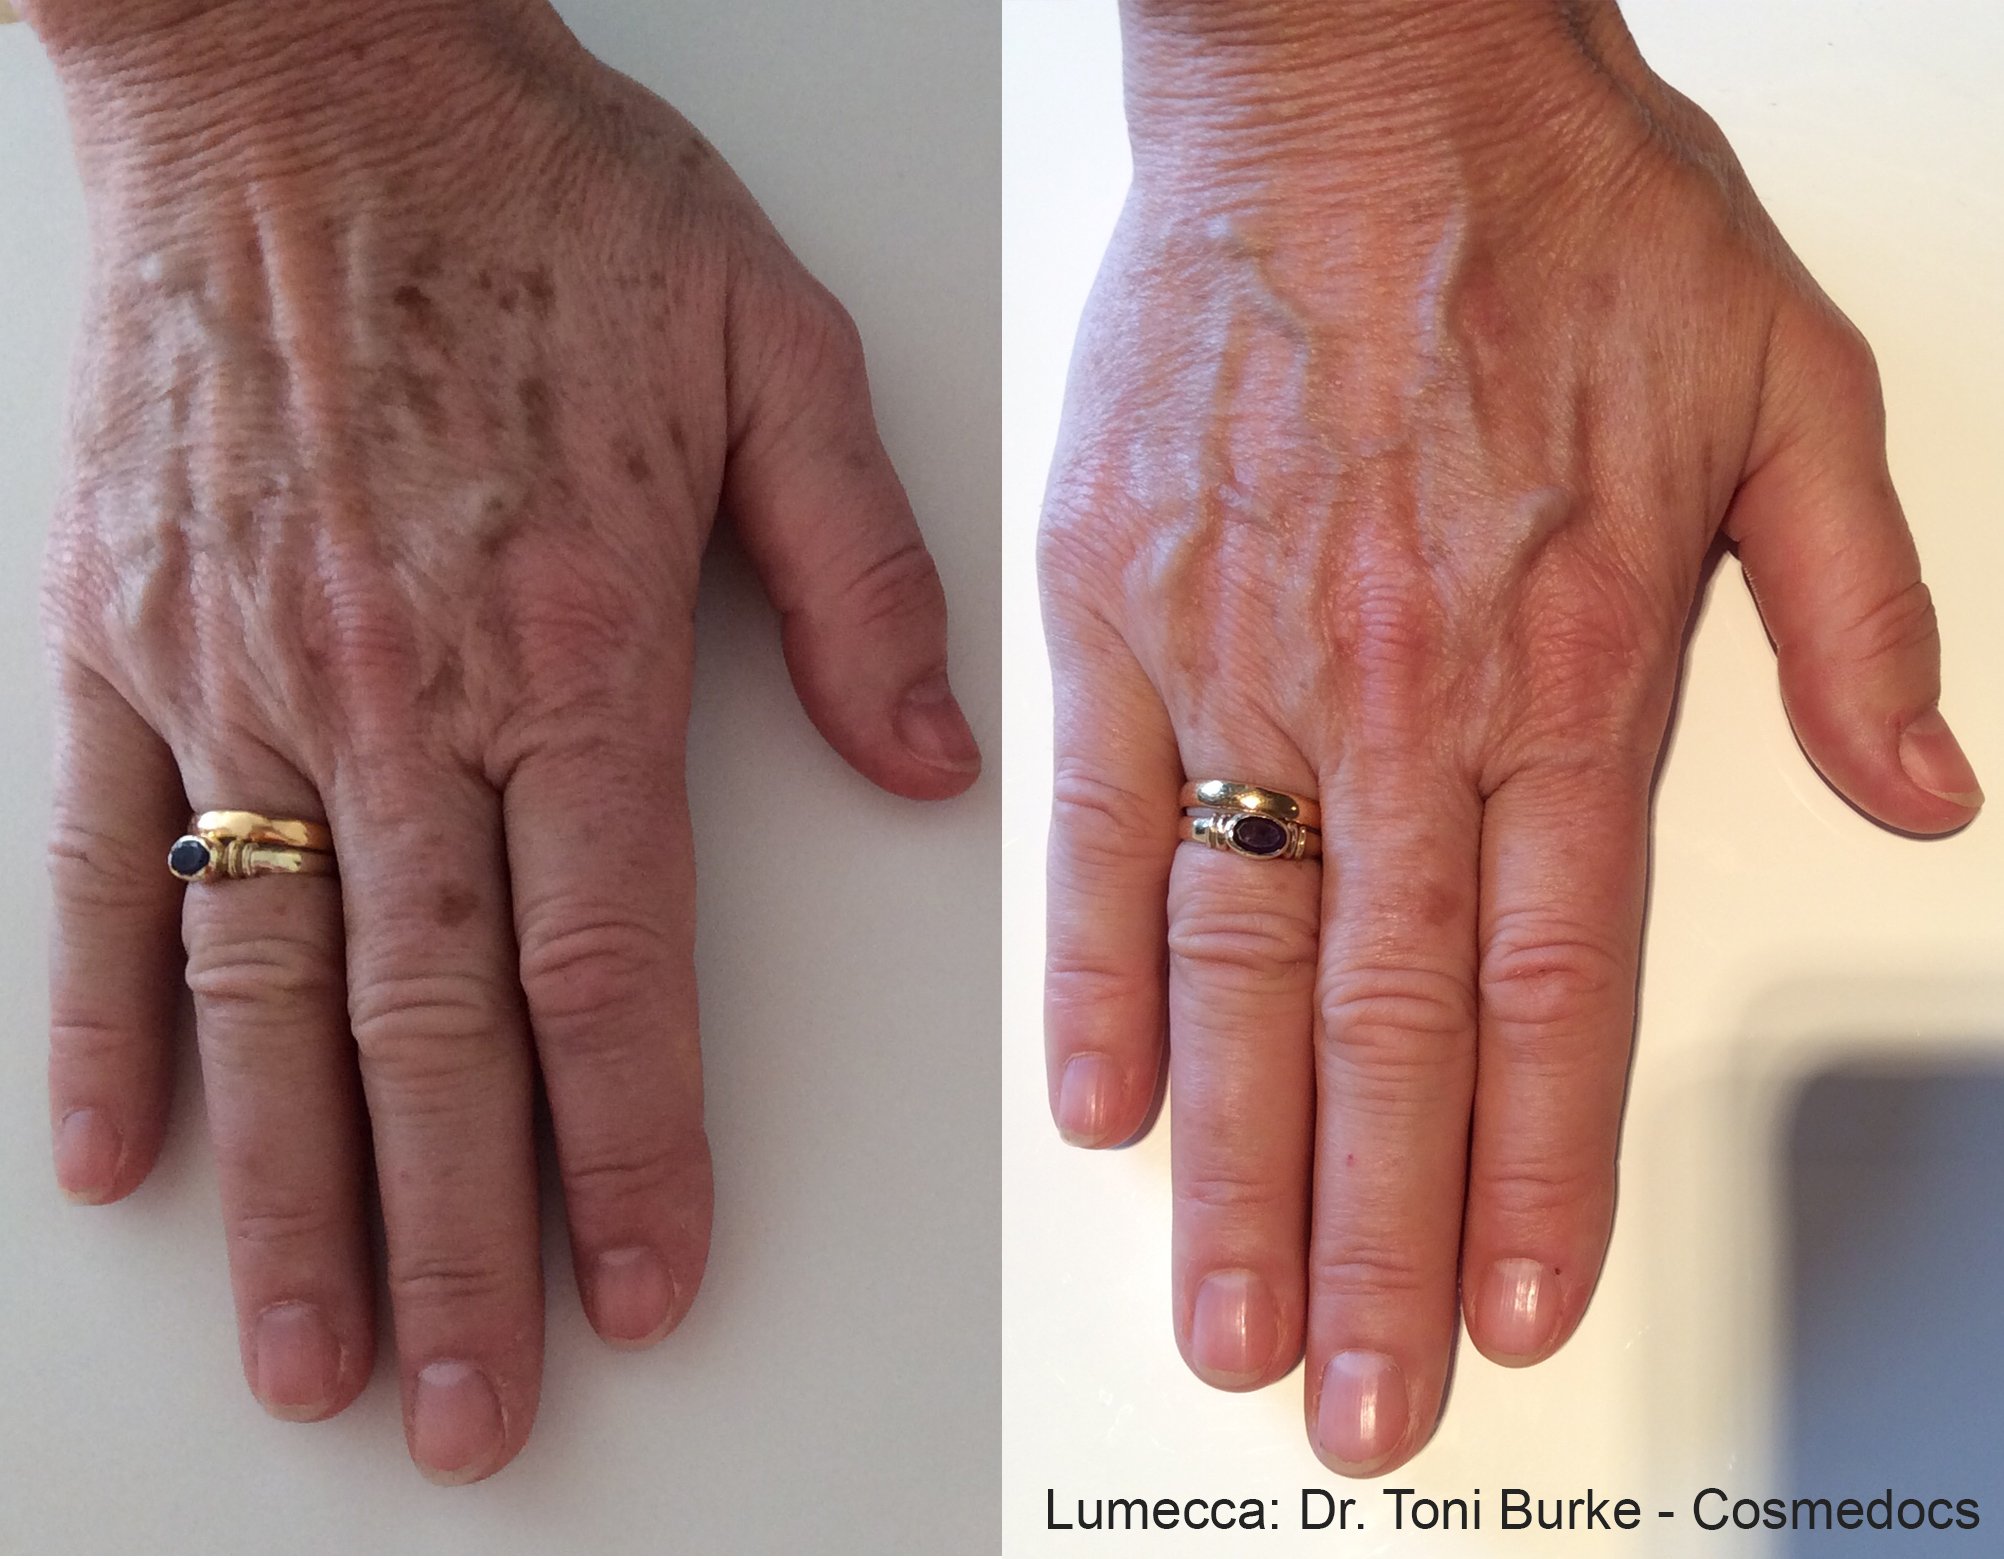 Remove age spots on hands with IPL Photofacial by Lumecca